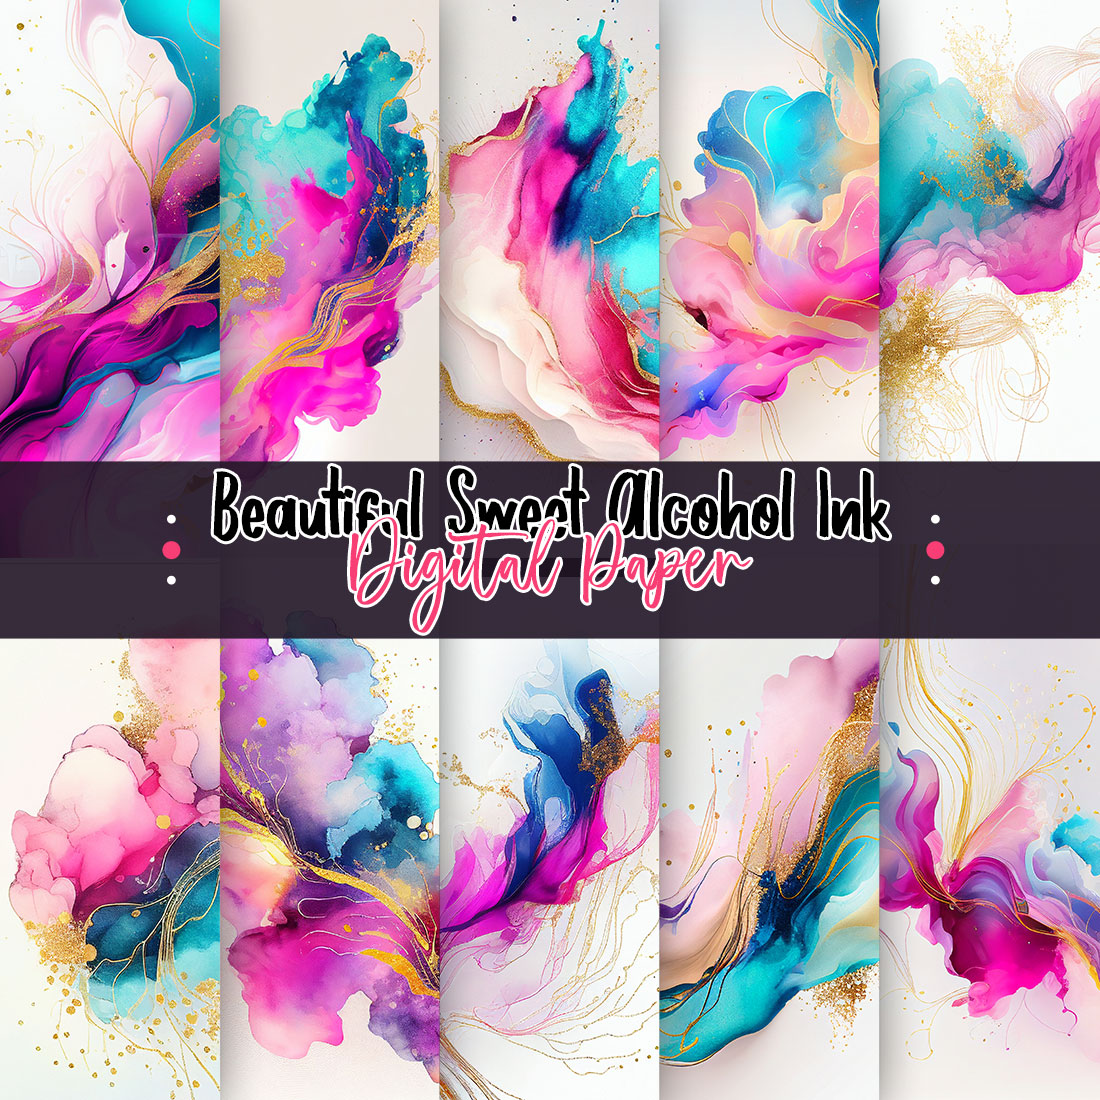 Sweet Alcohol Ink Digital Paper cover image.